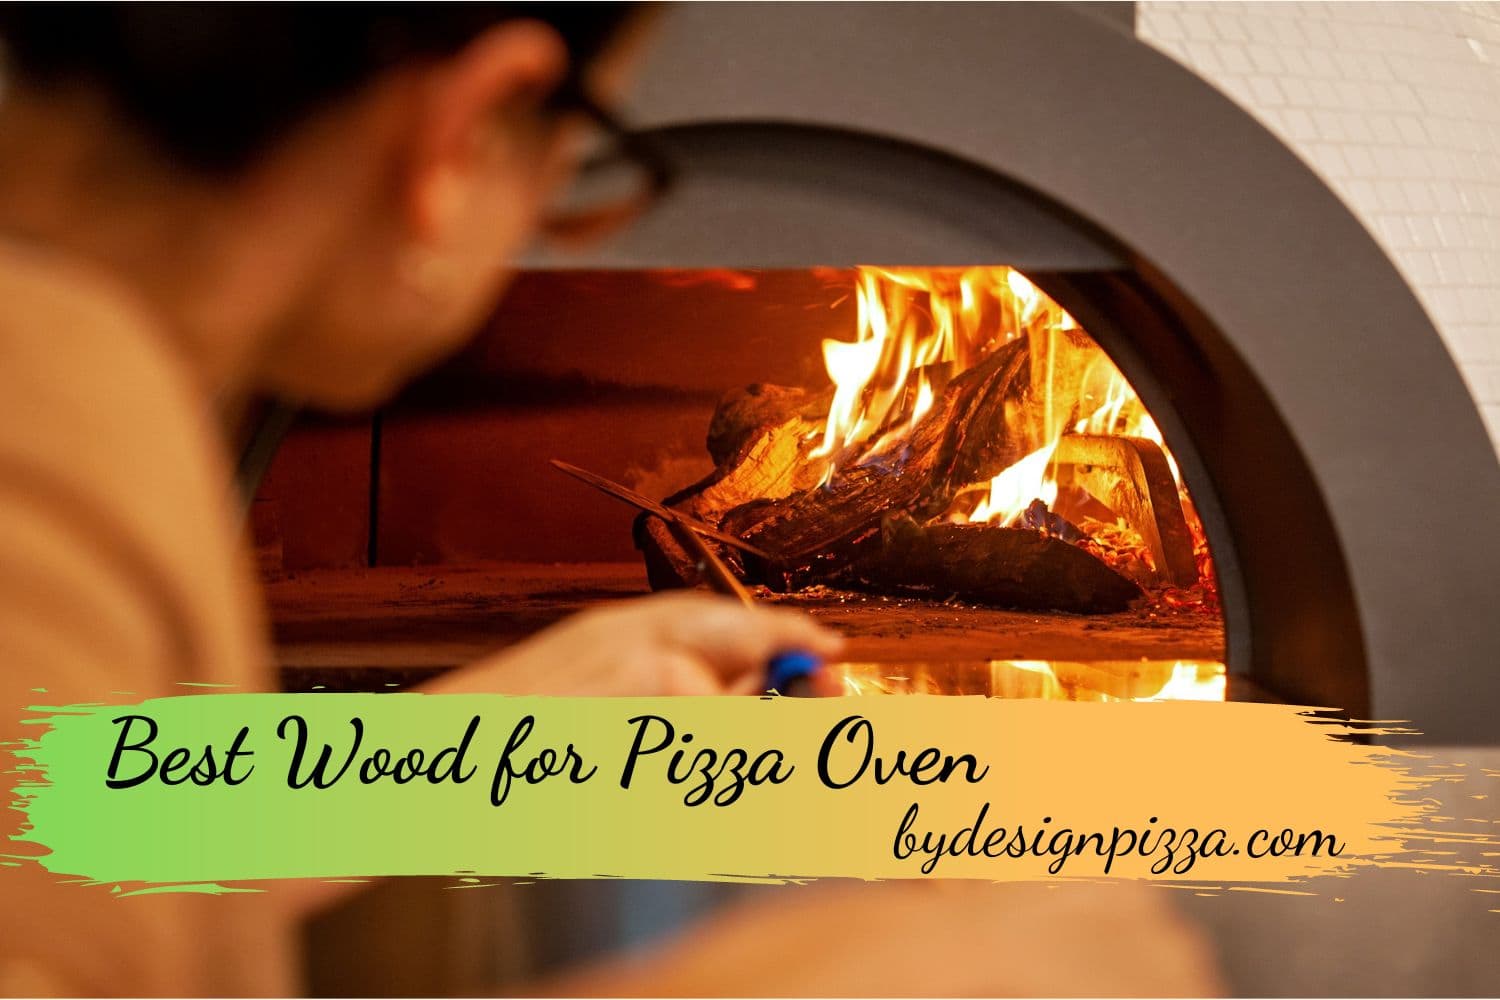 Best Wood for Pizza Oven